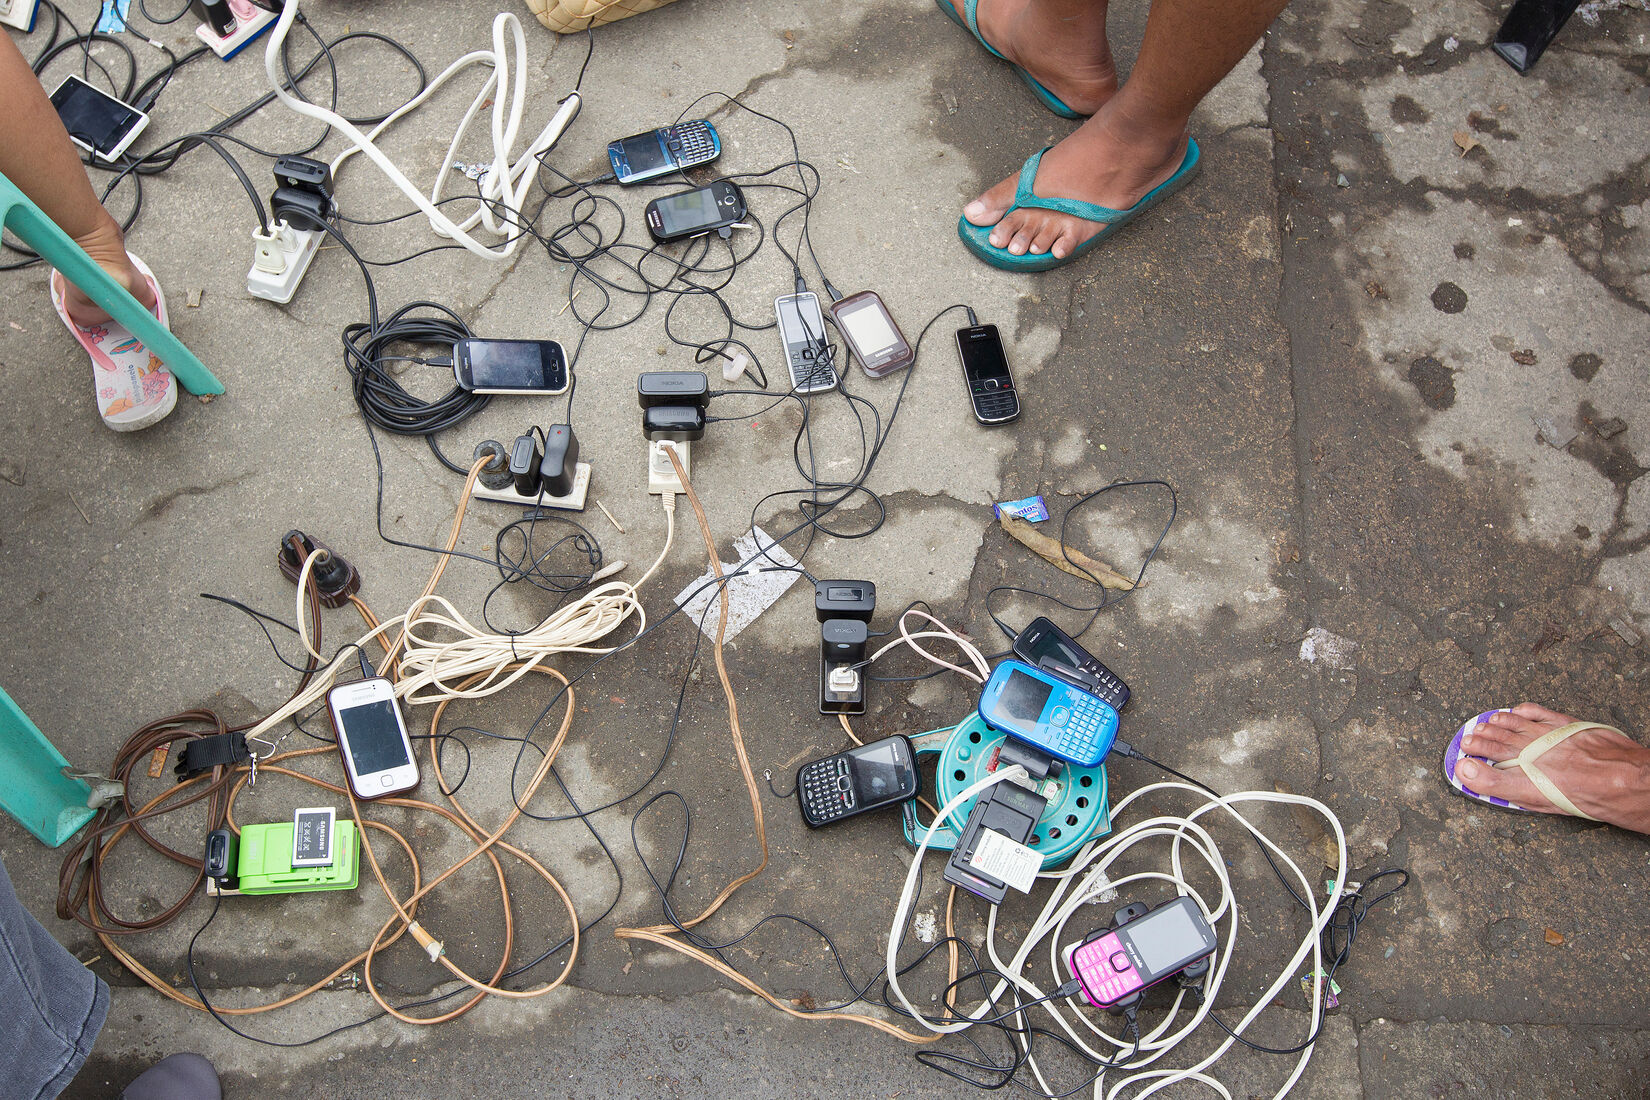 Survivors of Typhoon Haiyan charge their cell phones from a generator at the city hall in Tacloban, Philippines. (A UMNS photo by Mike DuBose.)